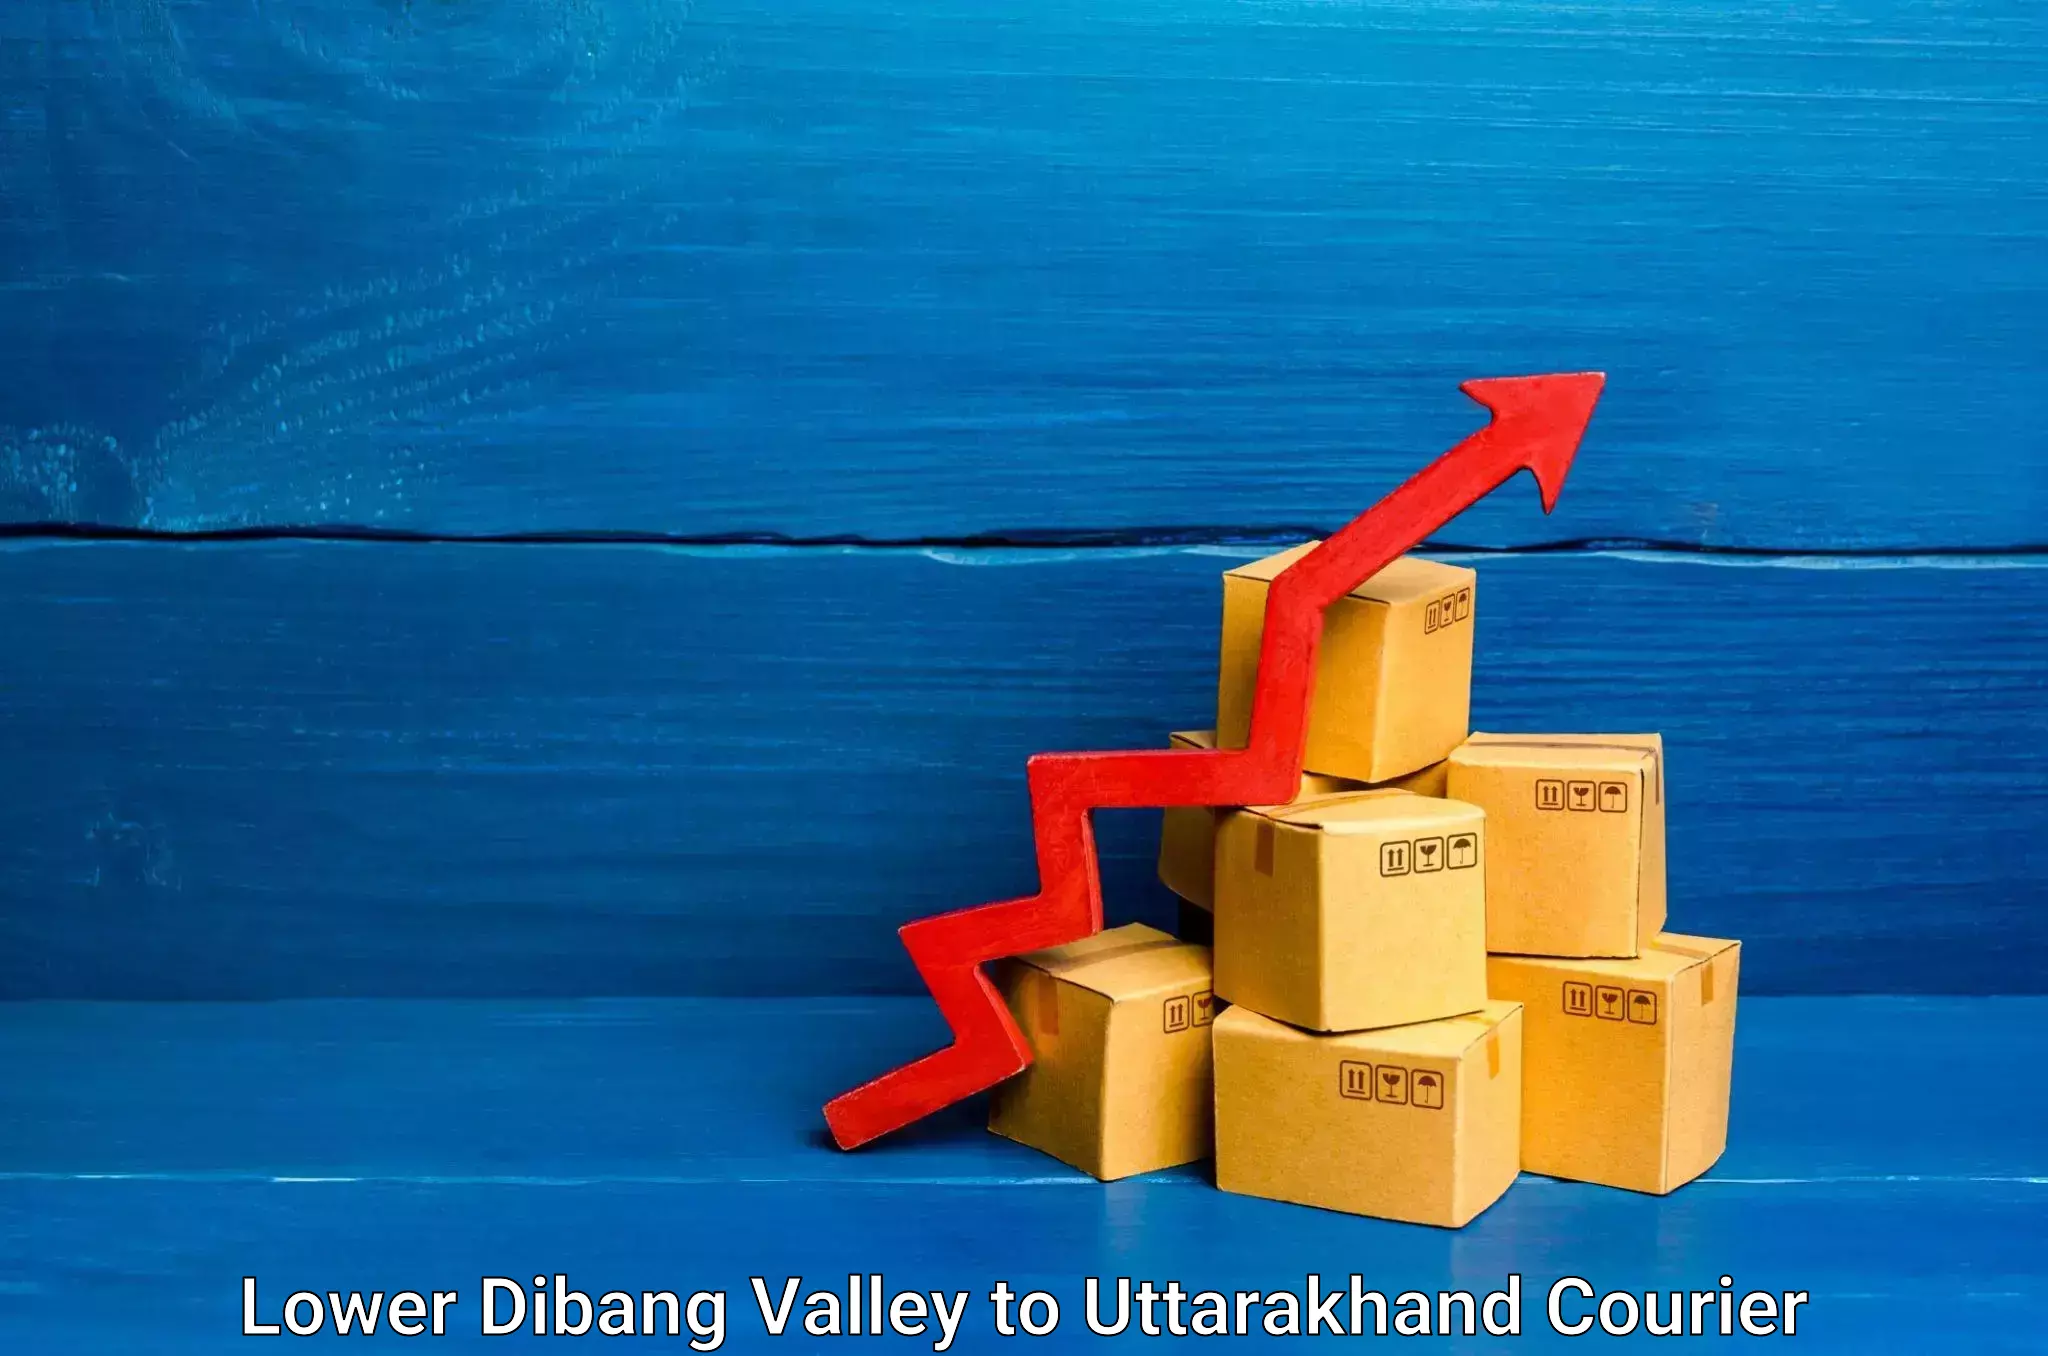 Courier service innovation Lower Dibang Valley to Uttarakhand